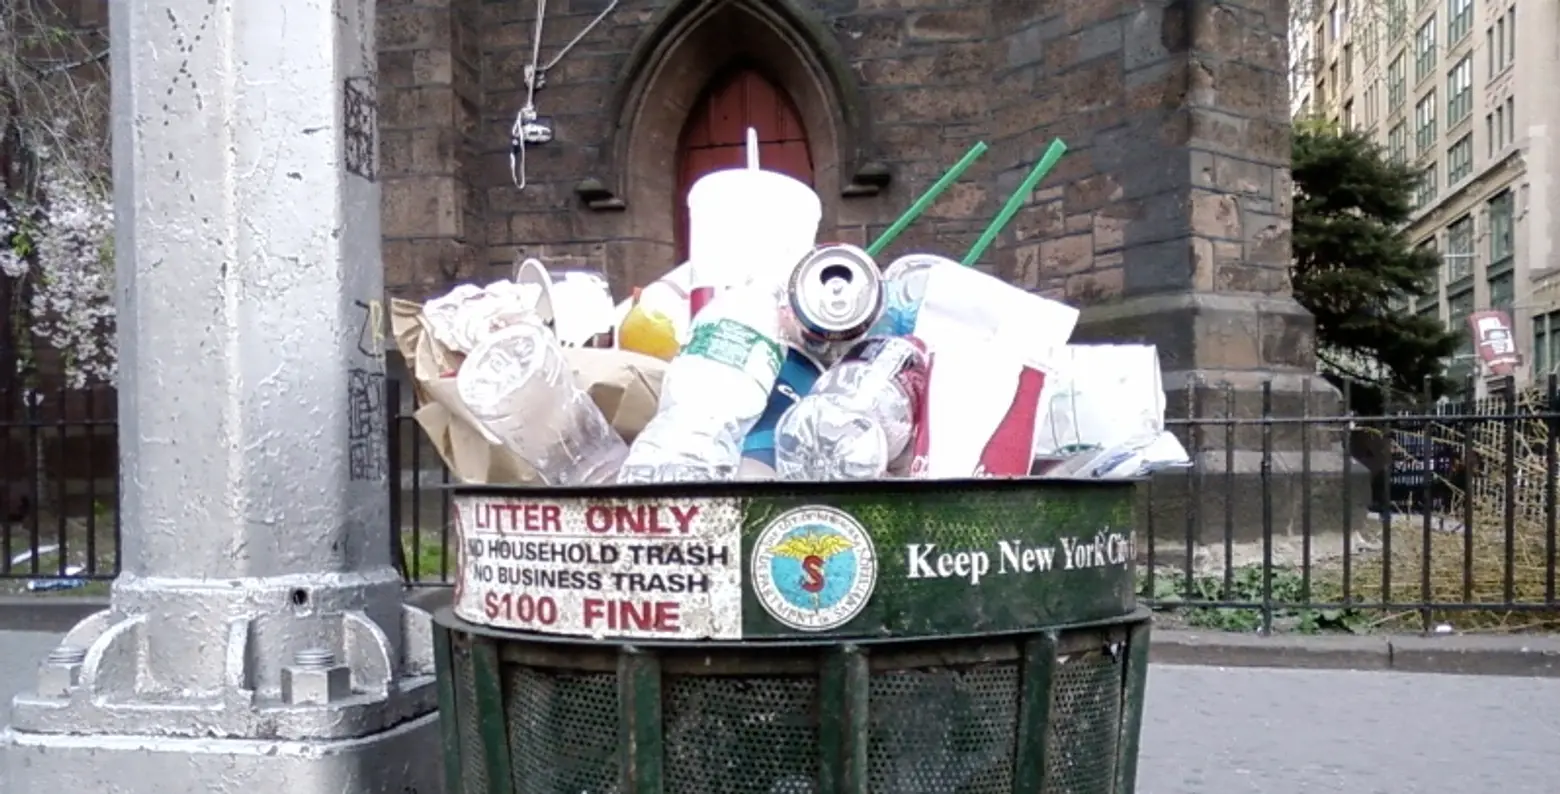 at least the trash is chic